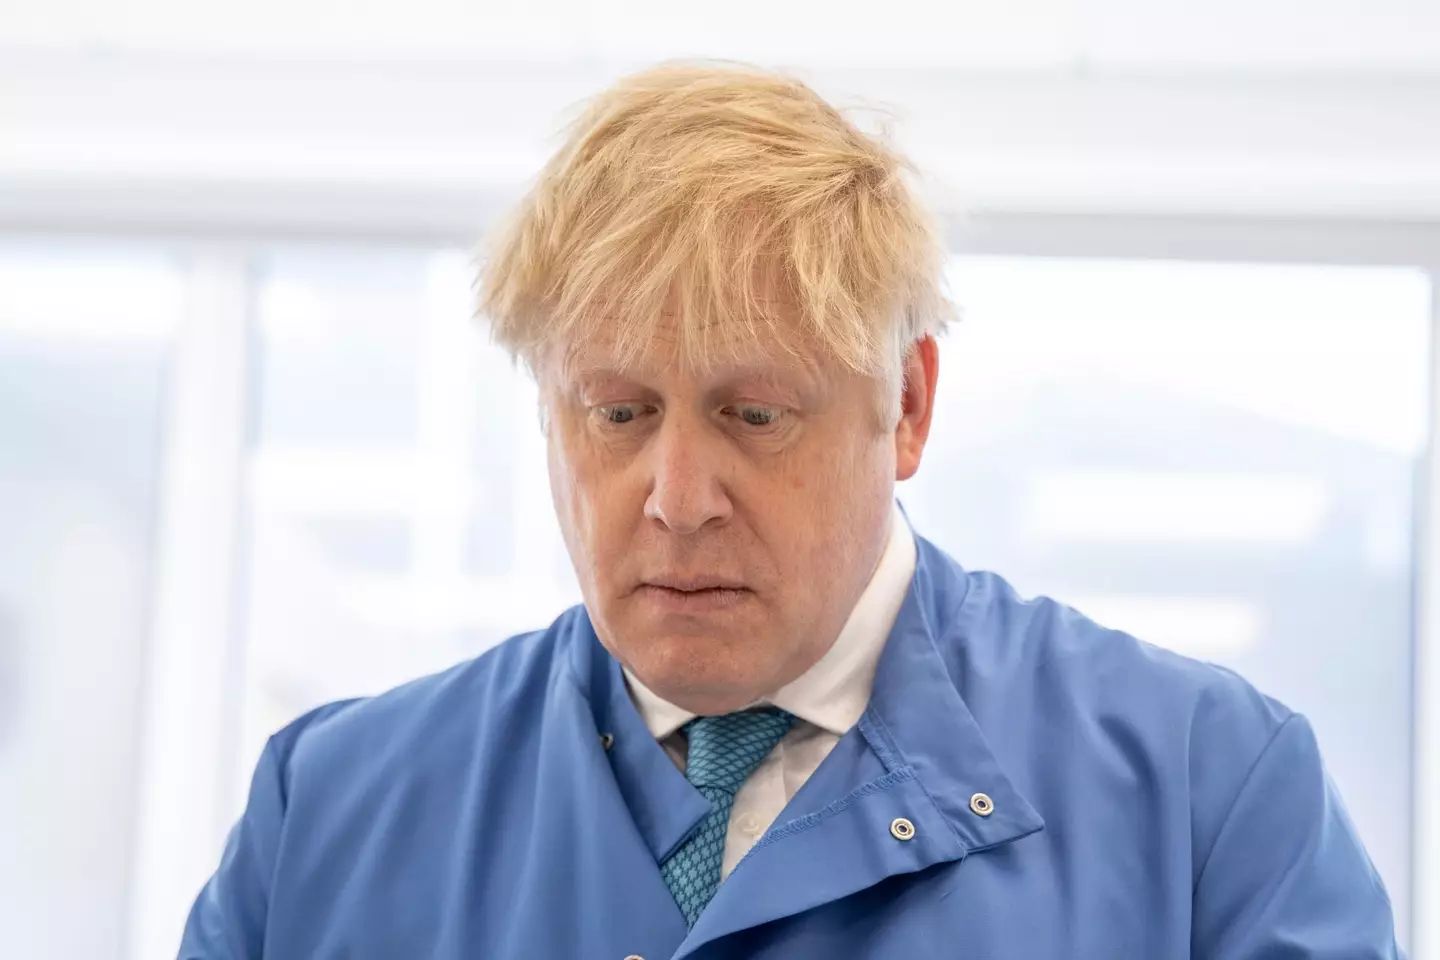 Johnson was caught not wearing a mask in hospital amid the coronavirus pandemic.